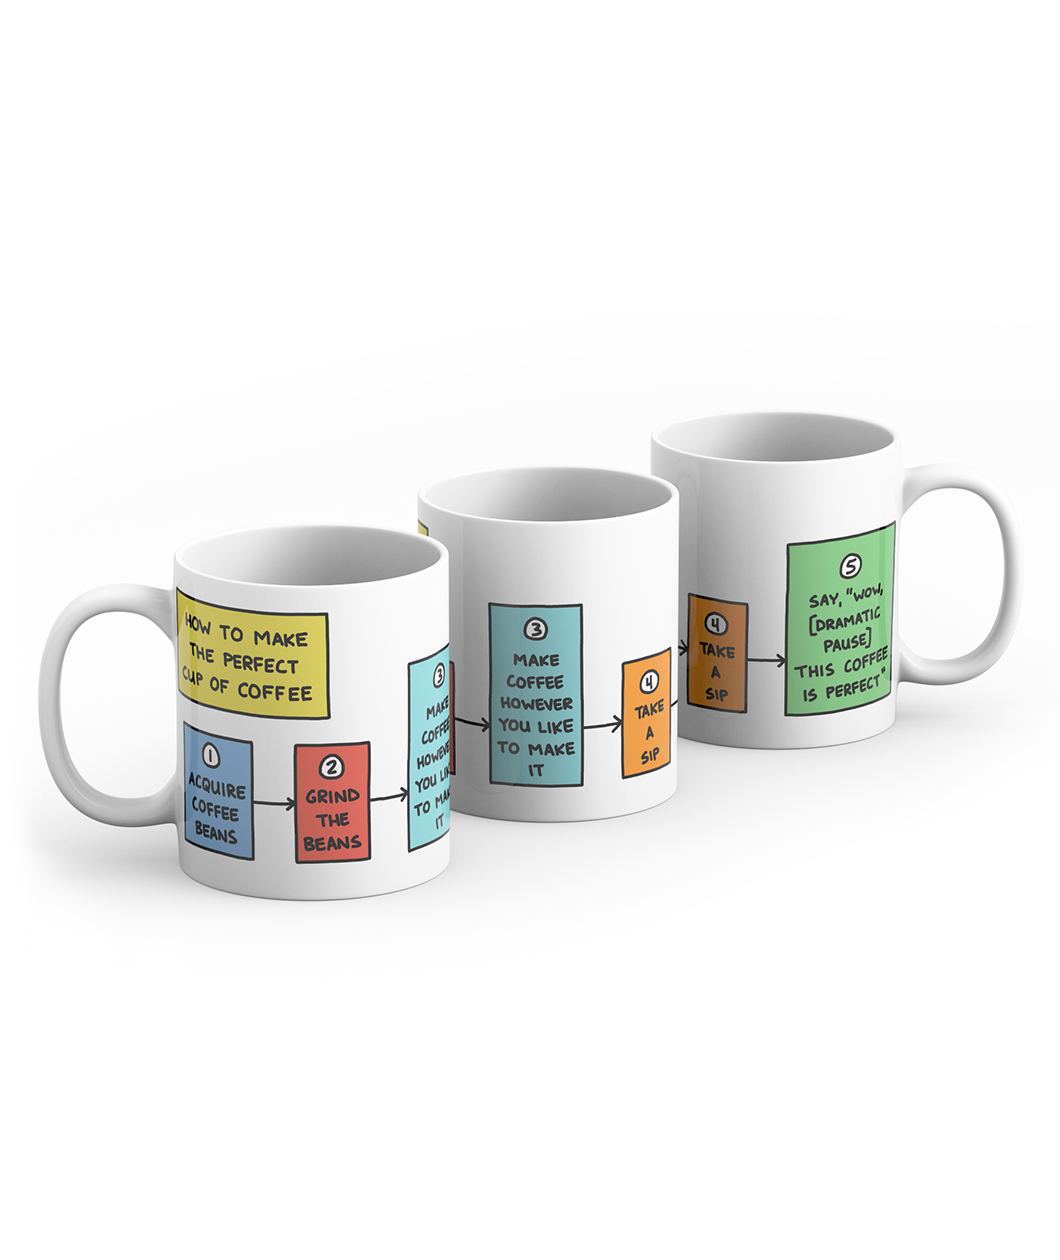 Three white mugs sit in a row showing all the different sides of the same mug which features five different steps of "How to make the perfect cup of coffee". From Semi Rad. 